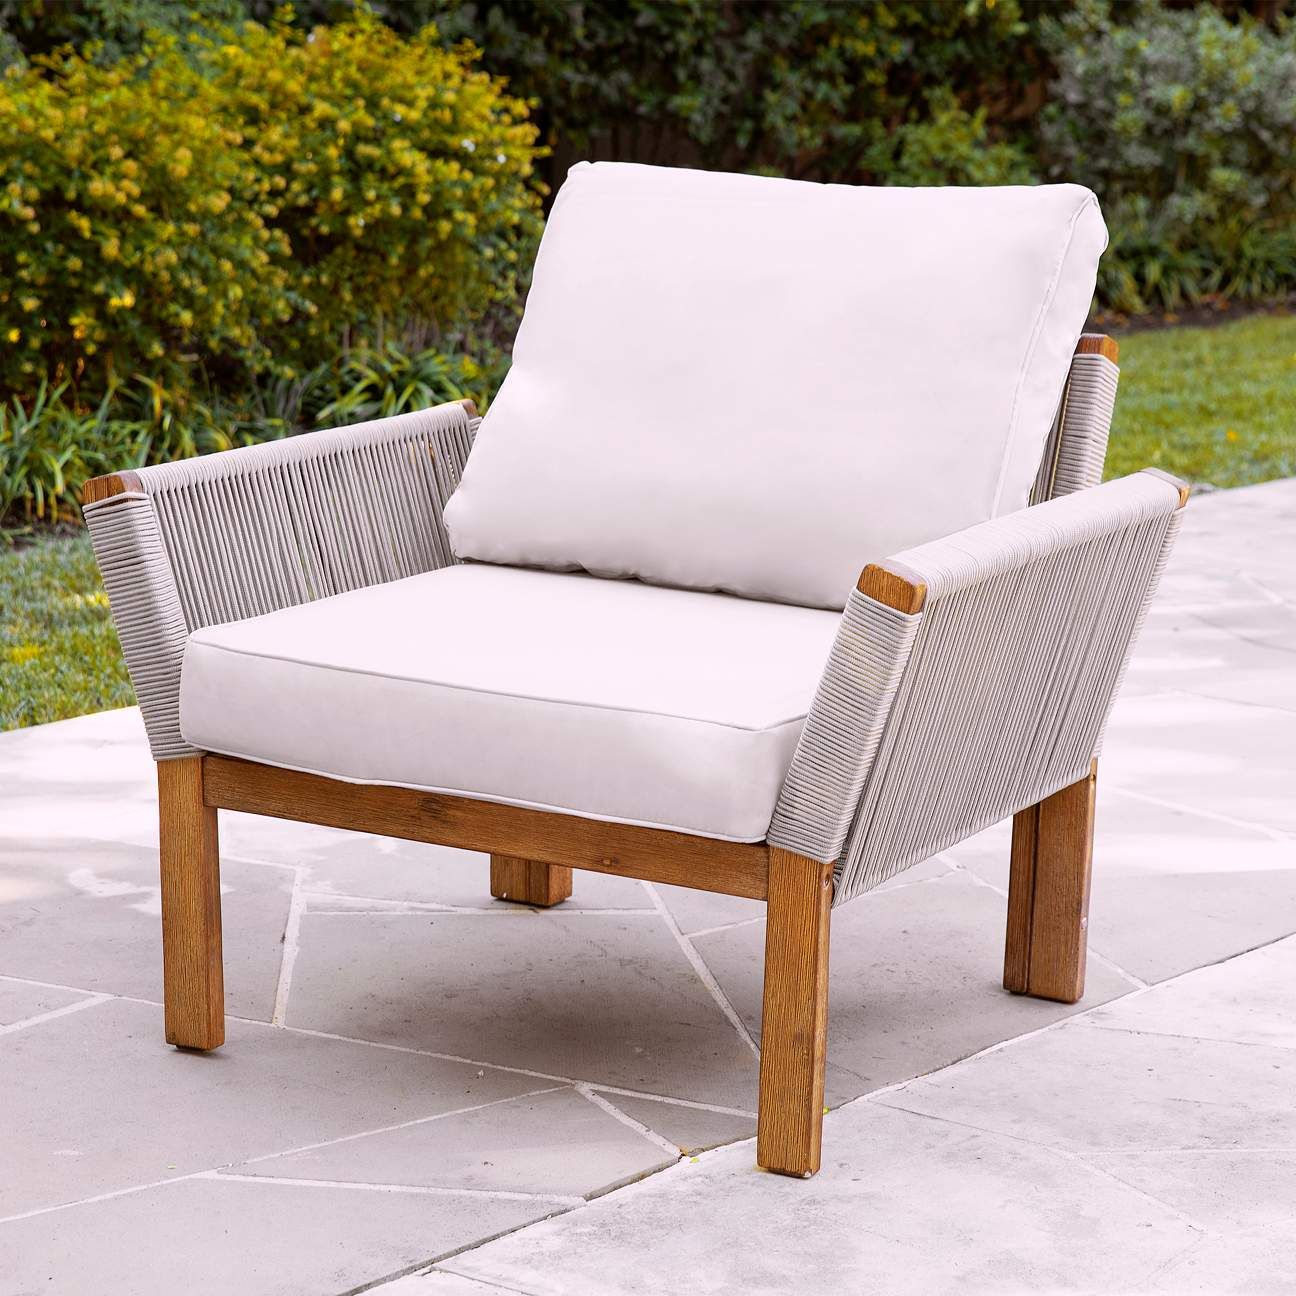 Brendina Woven Rope and White Fabric Outdoor Armchair | Lamps Plus